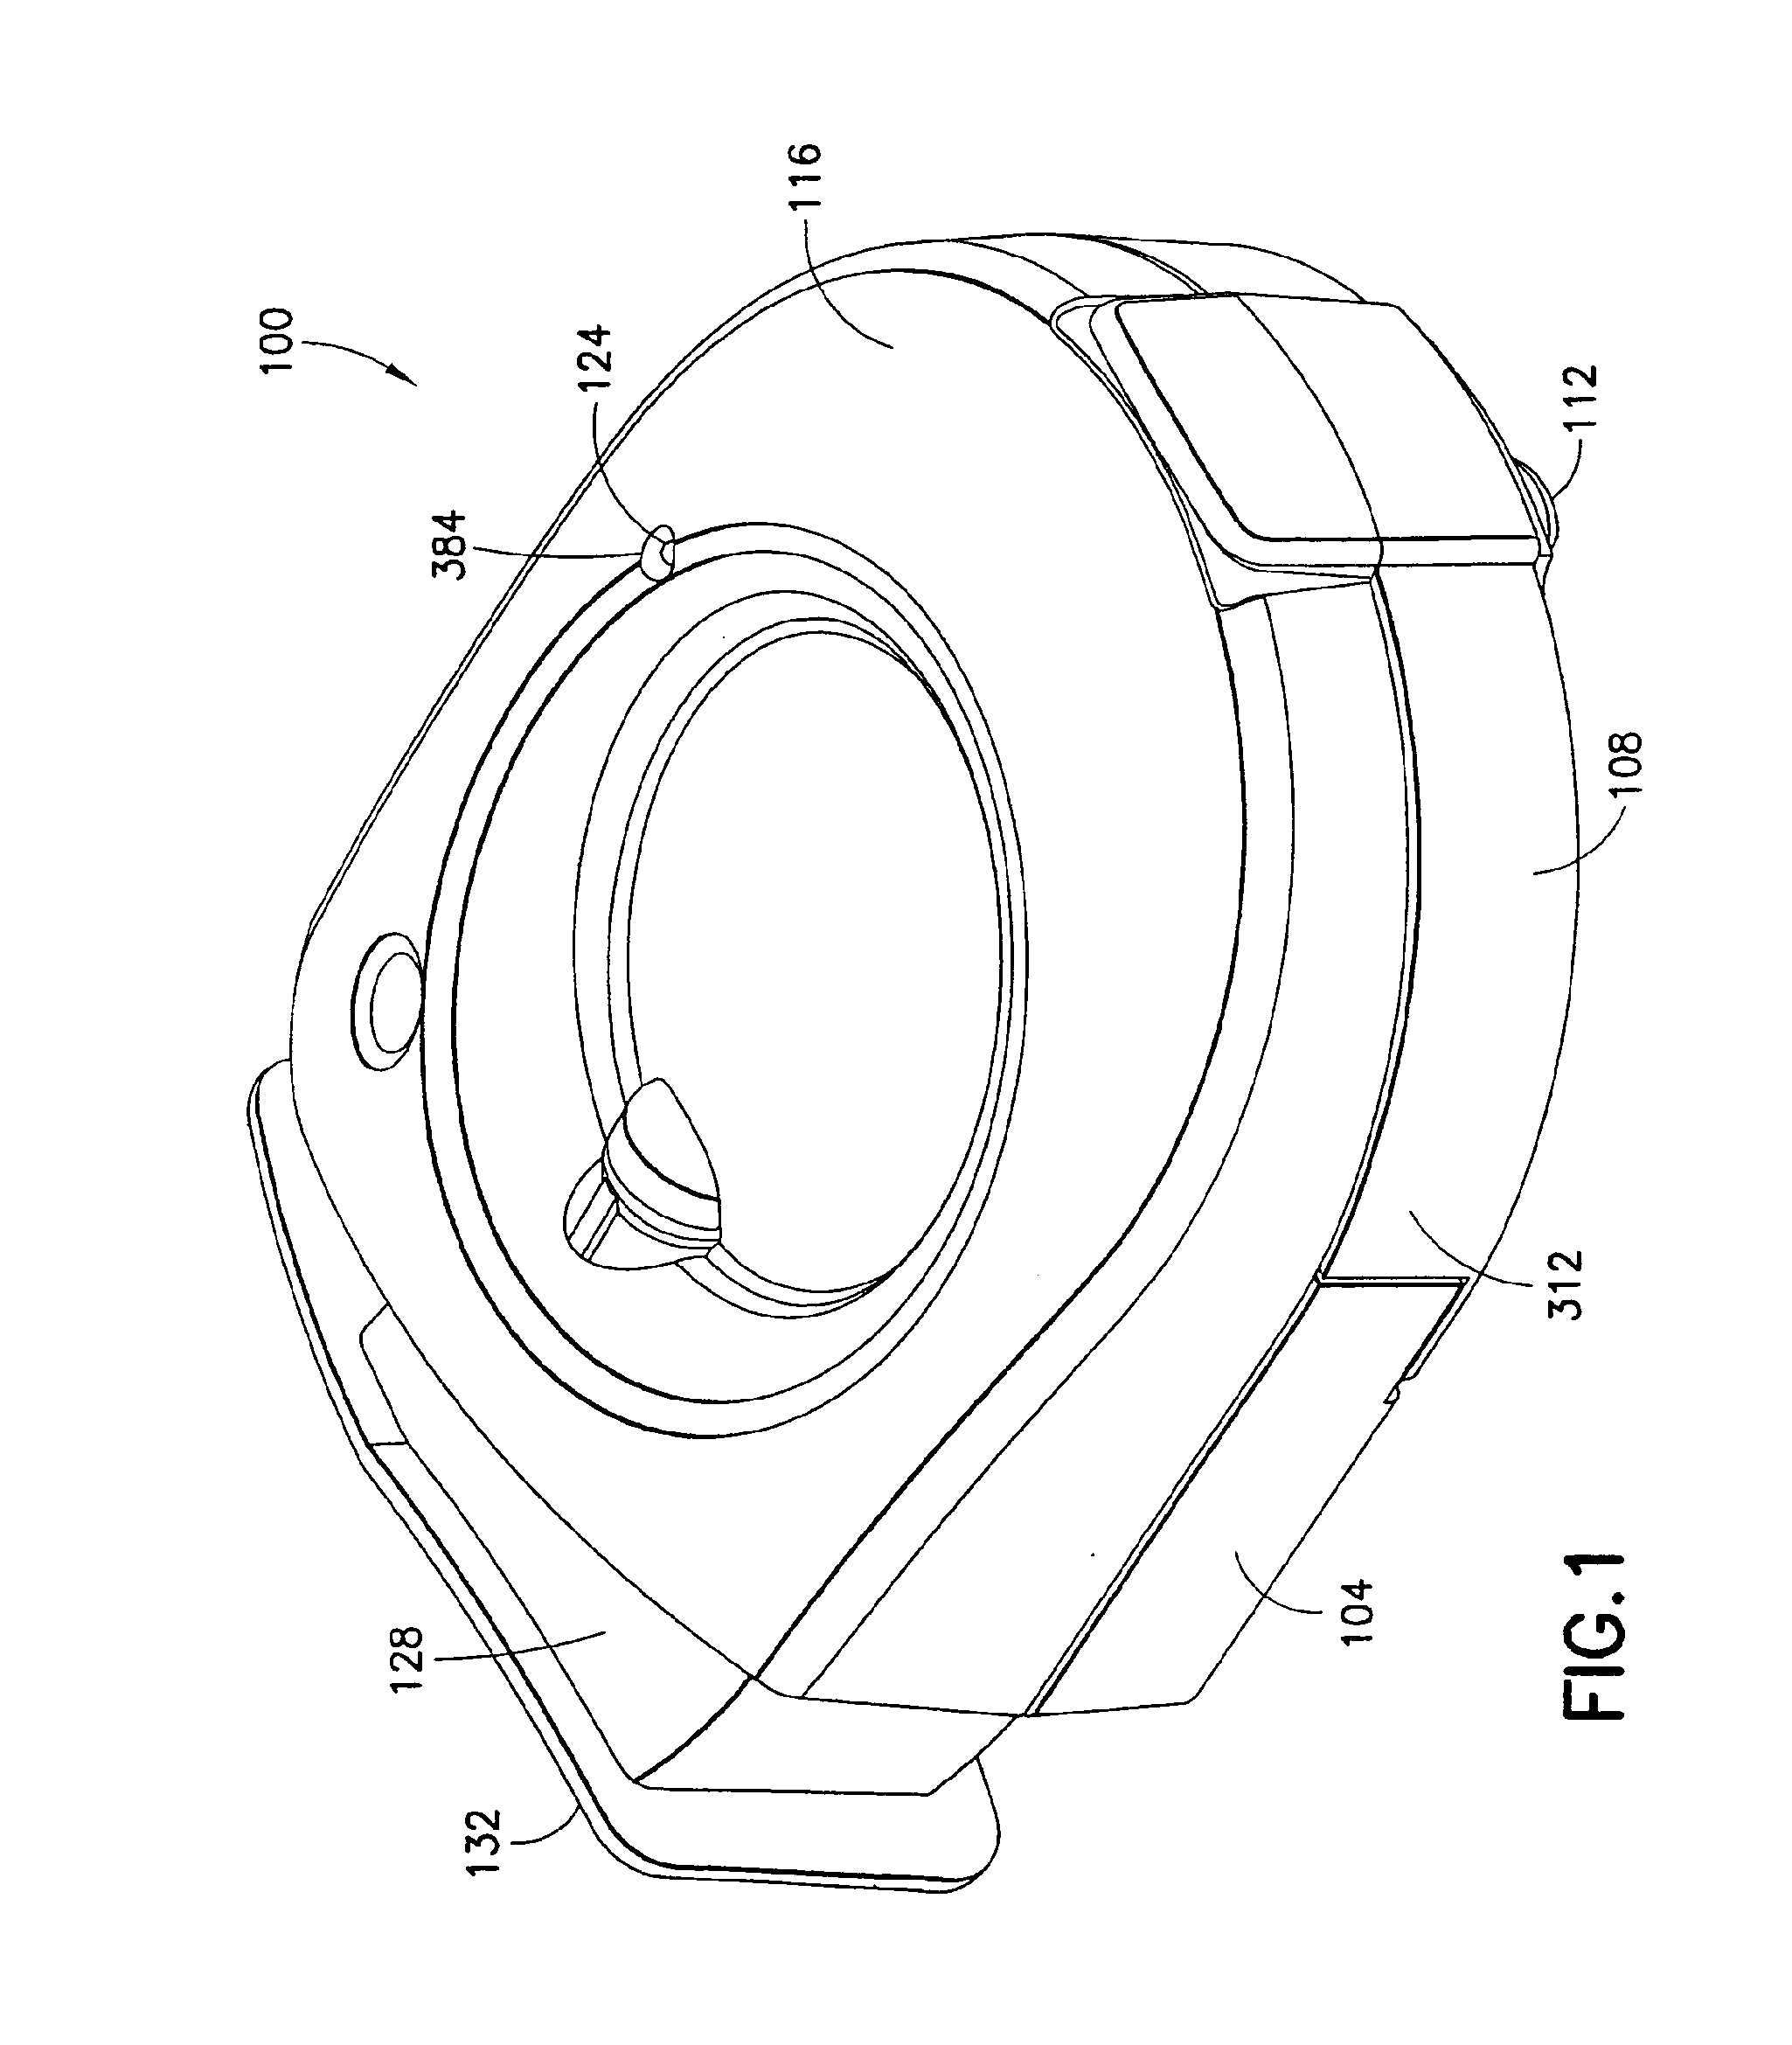 Self-injection device